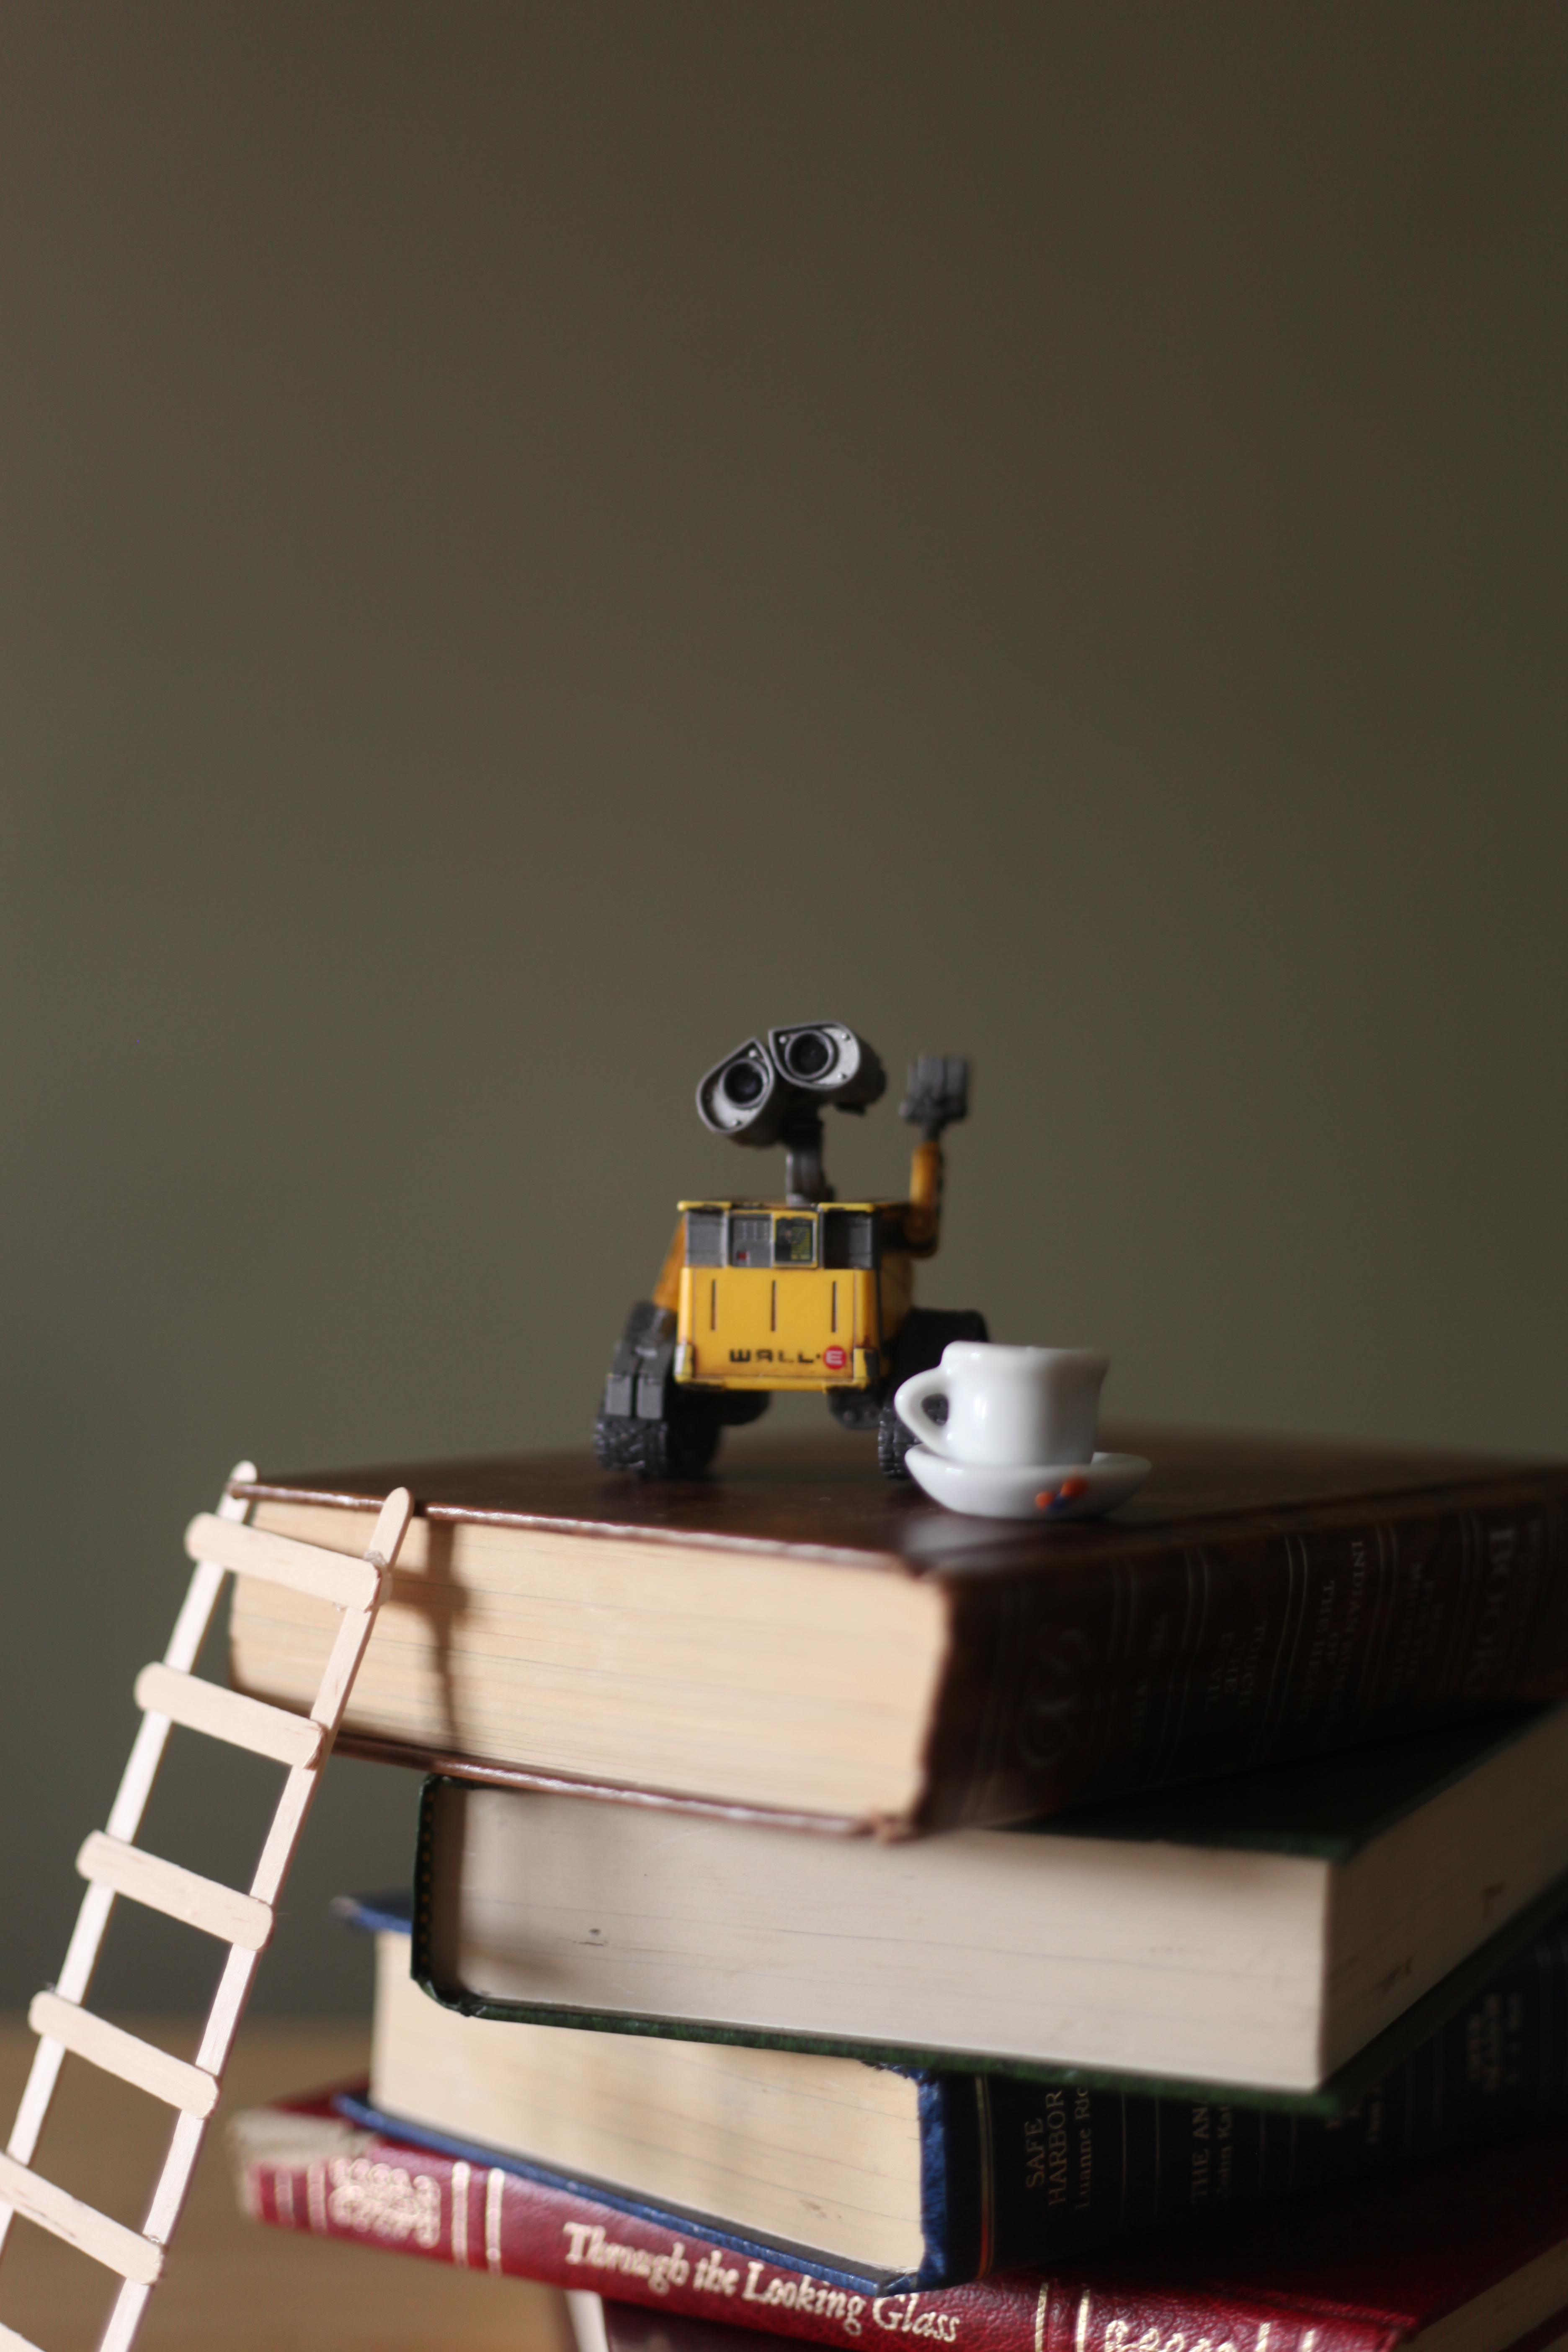 wall-e stand in